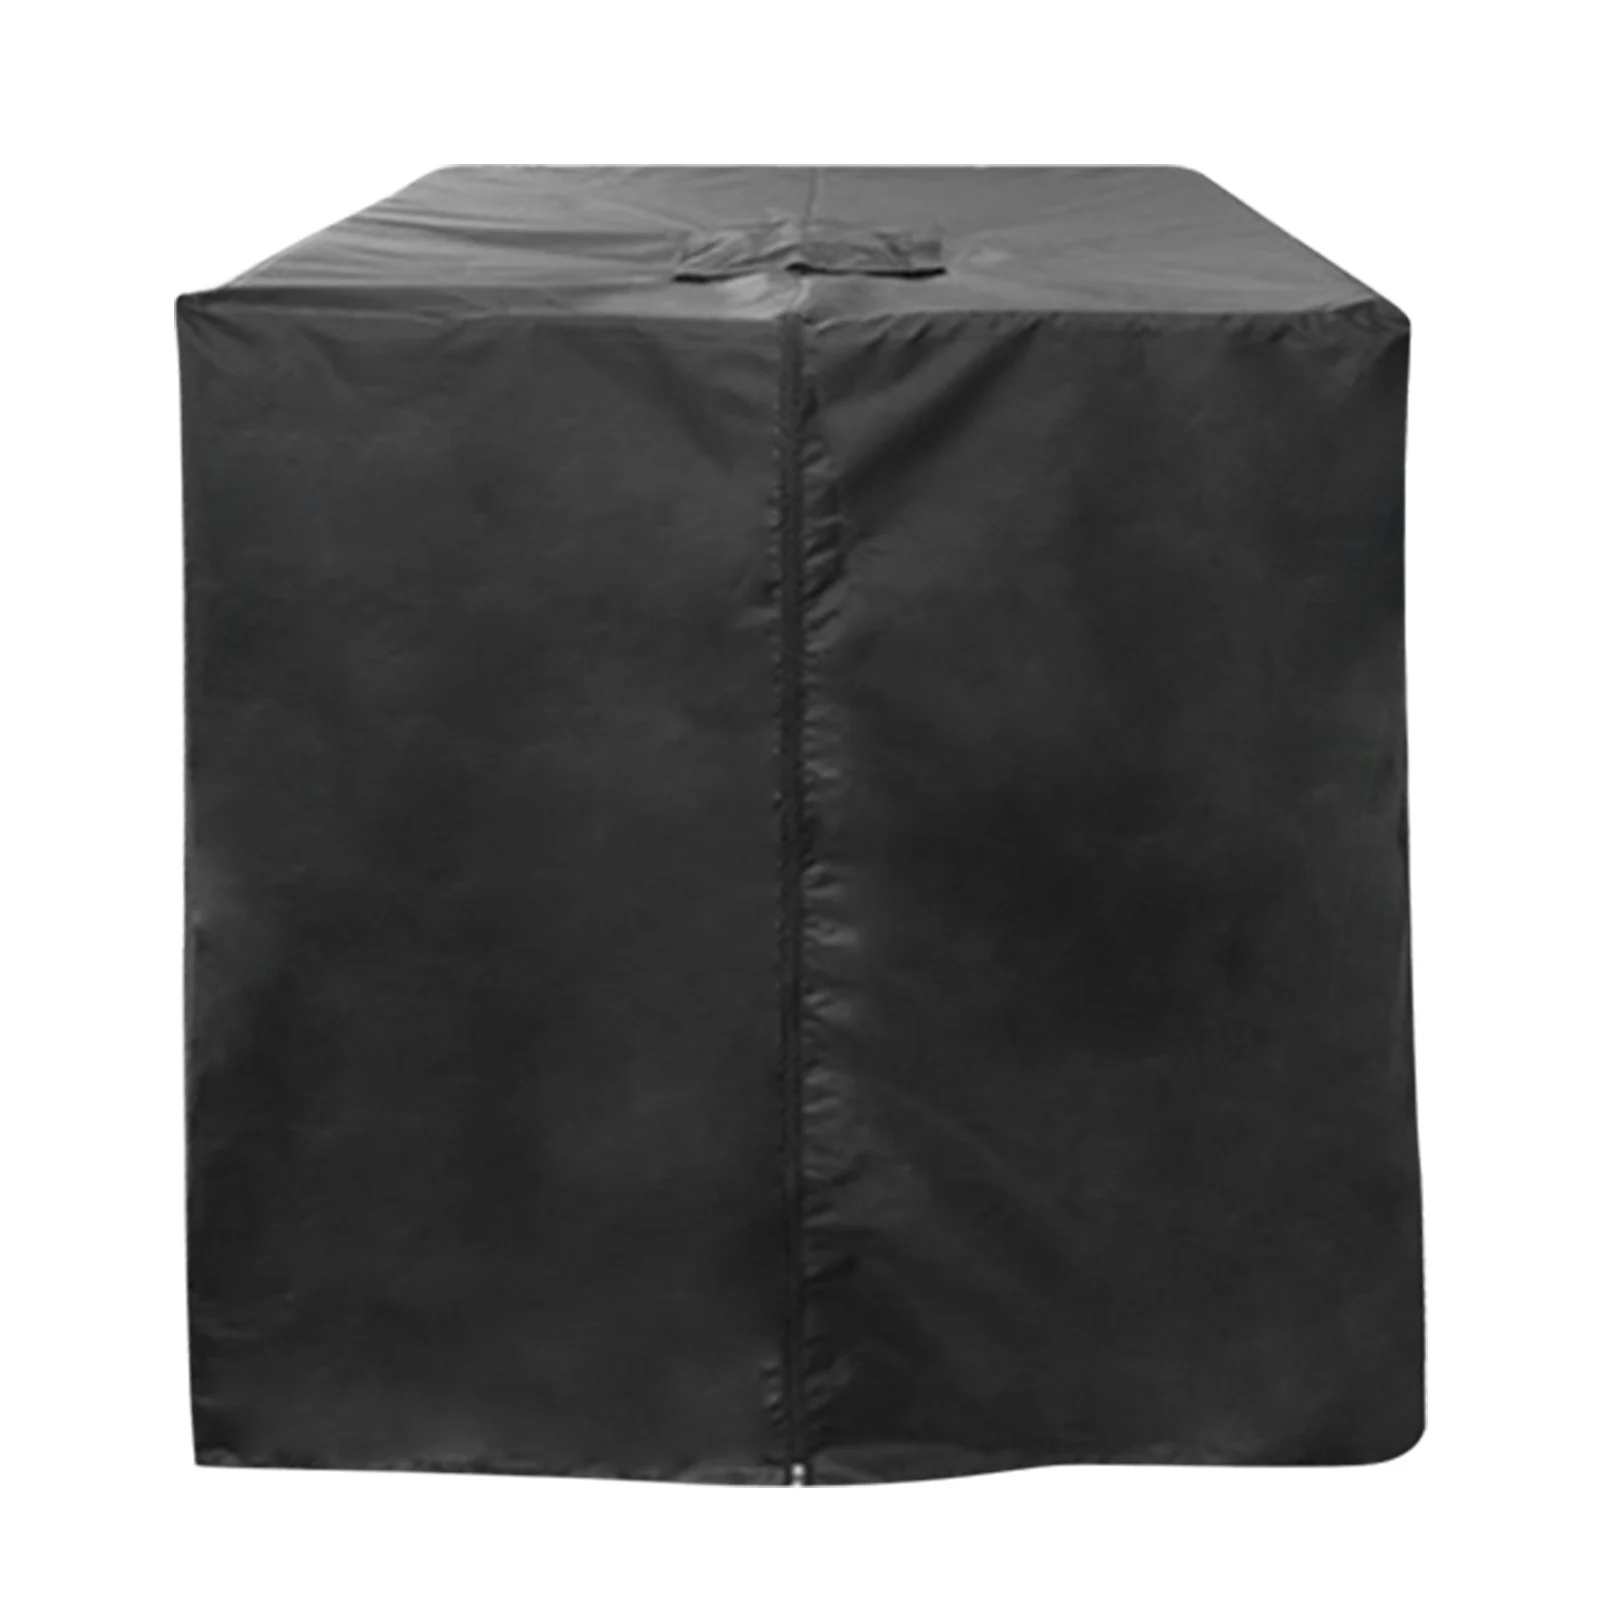 With Zipper IBC Tote Cover Sun Protection 1000L Water Tank Oxford Cloth Waterproof Black 275 Gallon Folding Household Anti-Dust